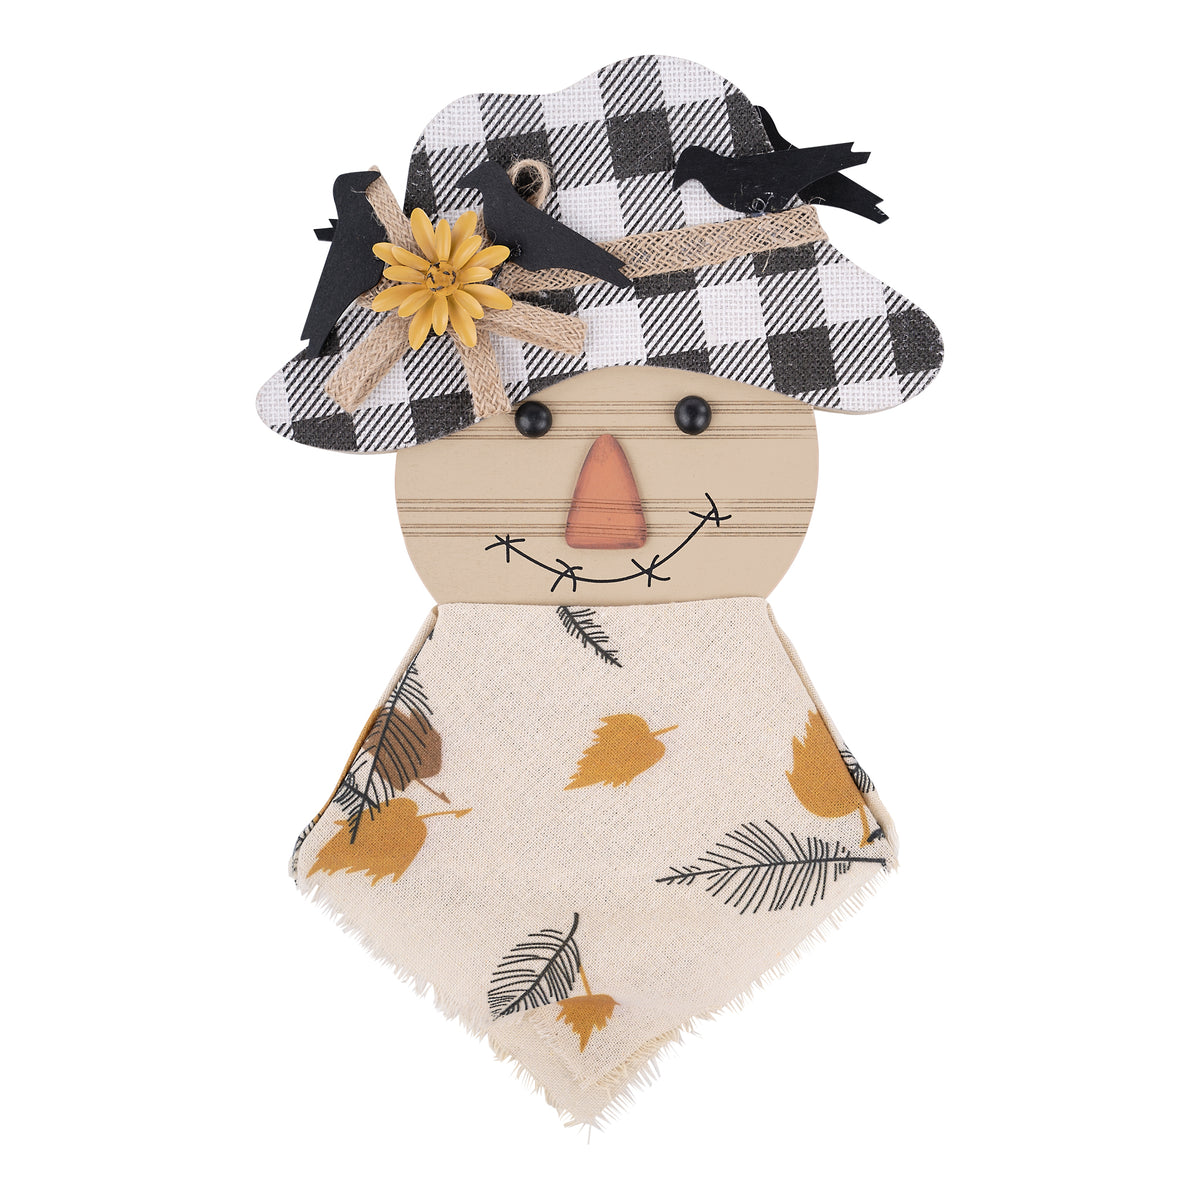 Scarecrow With Black Birds Topper